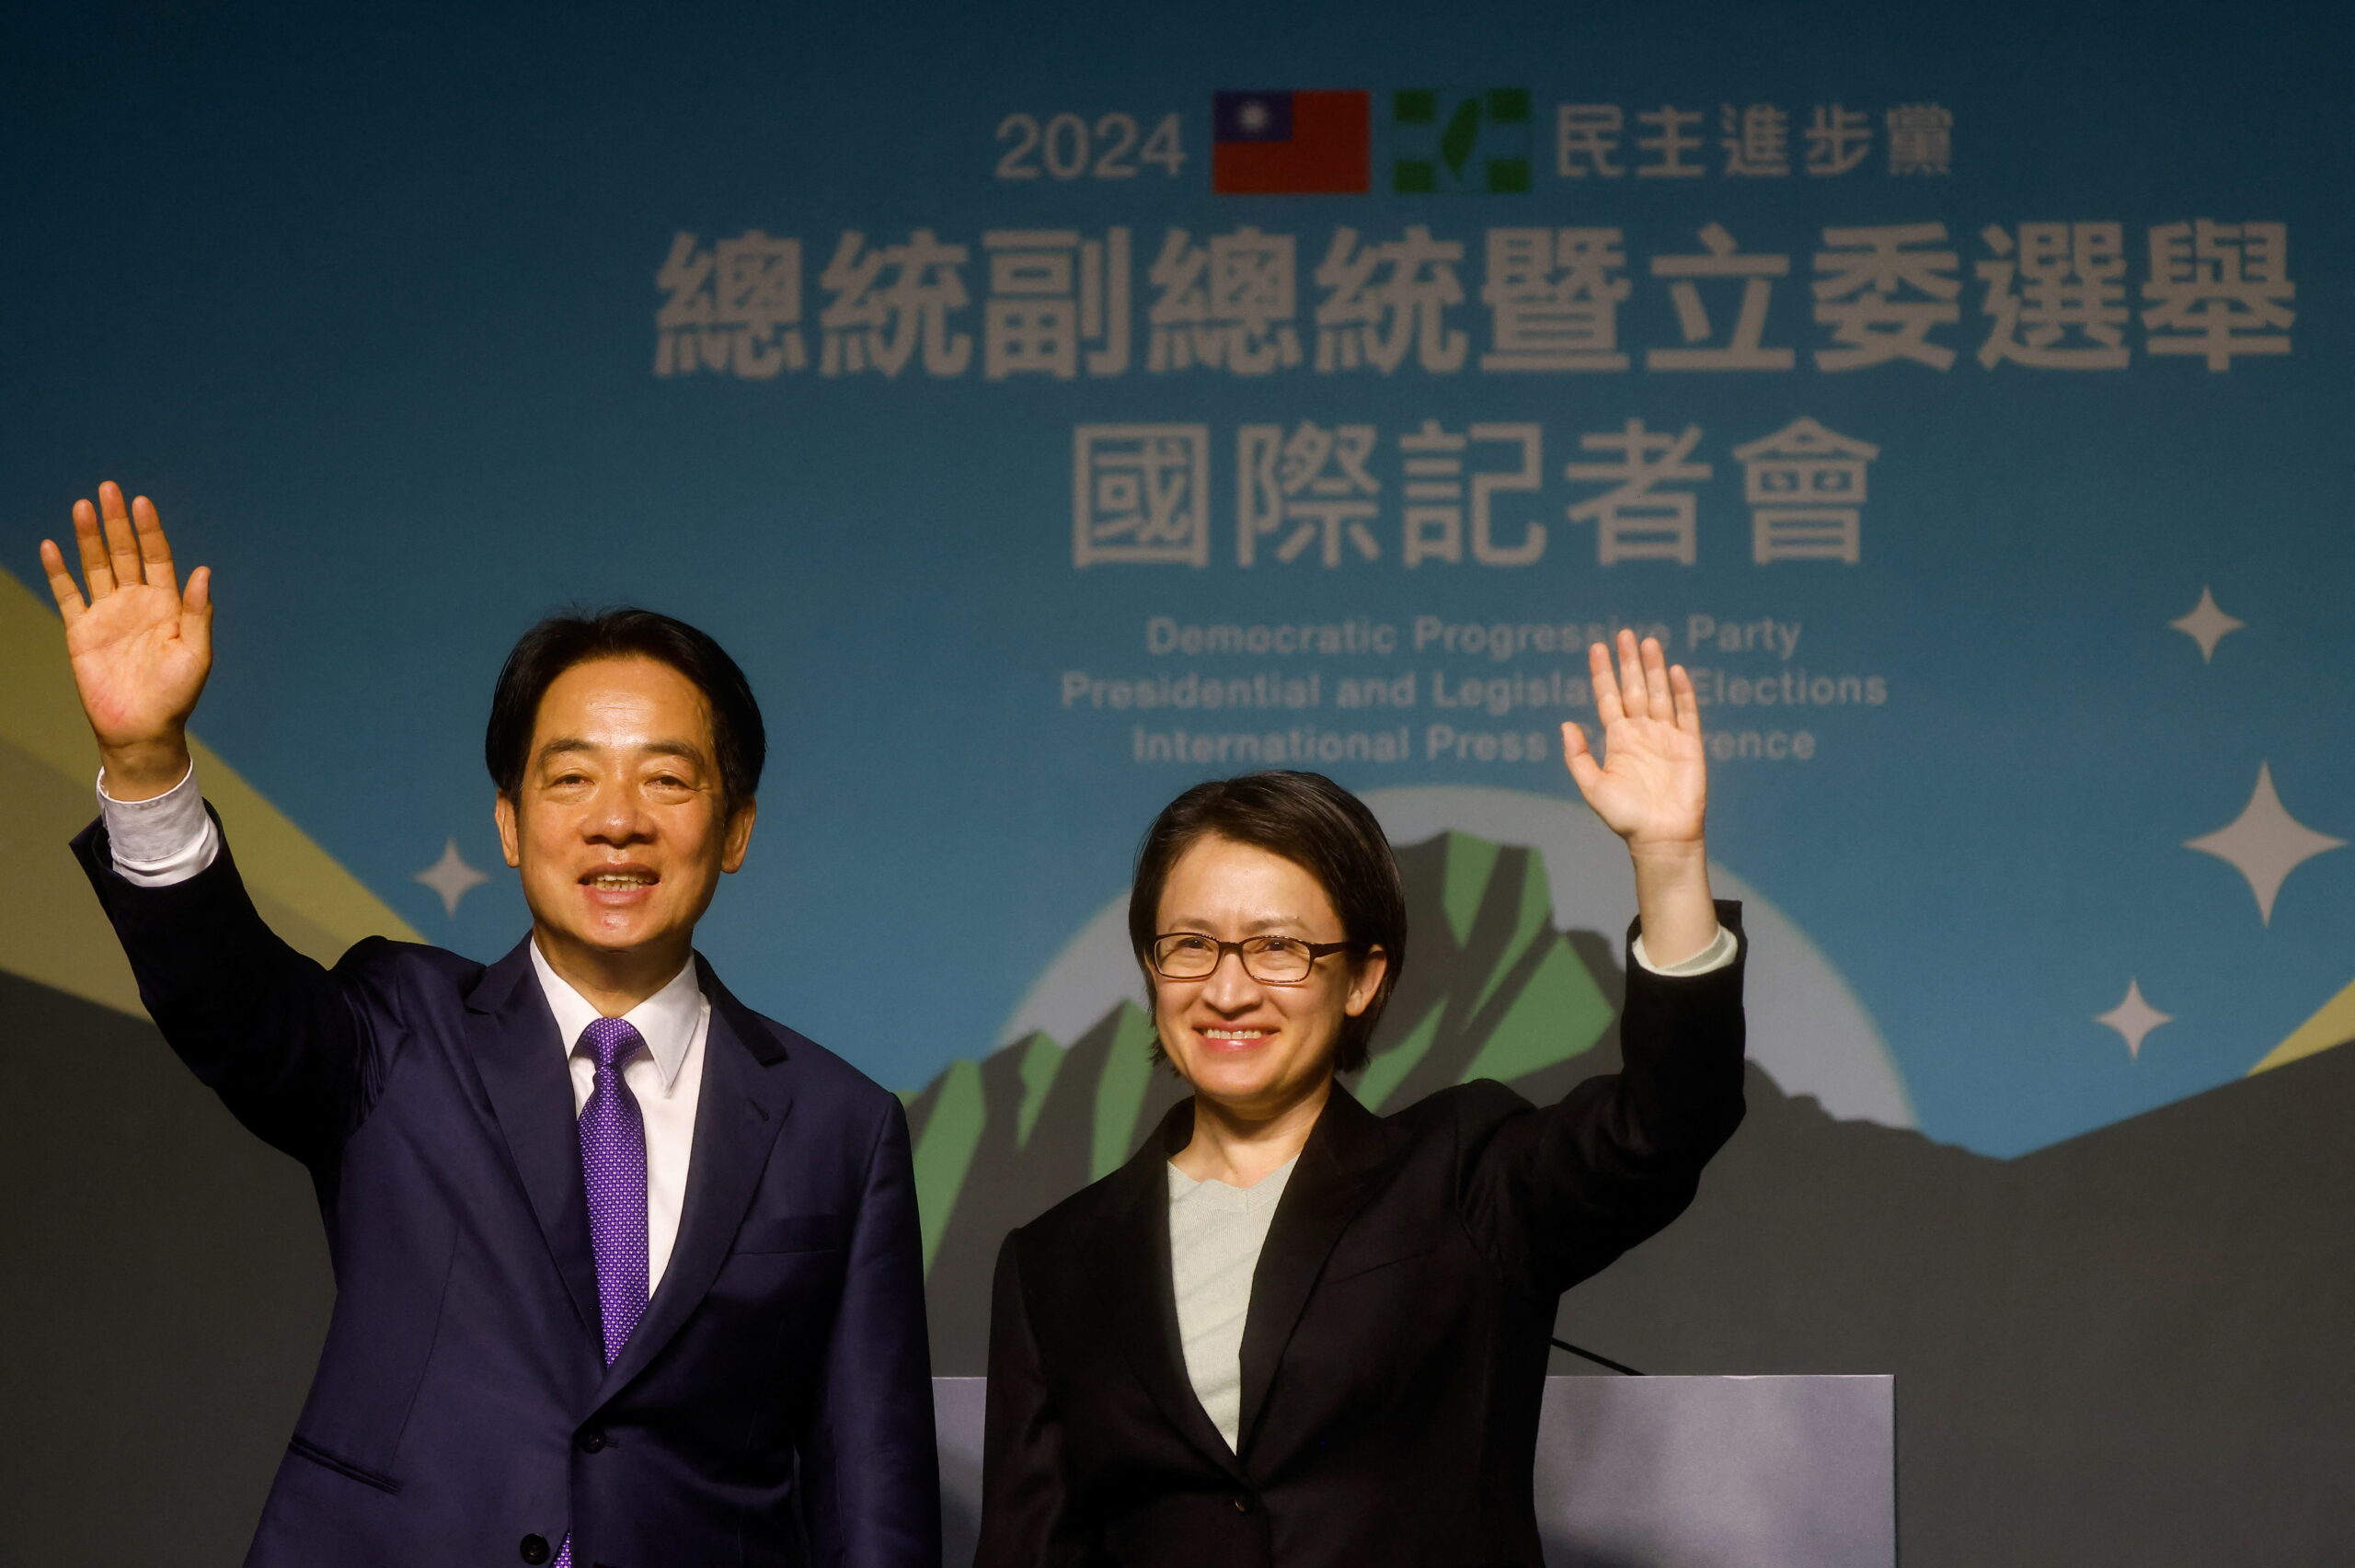 South Asia sides with China after Taiwan’s elections